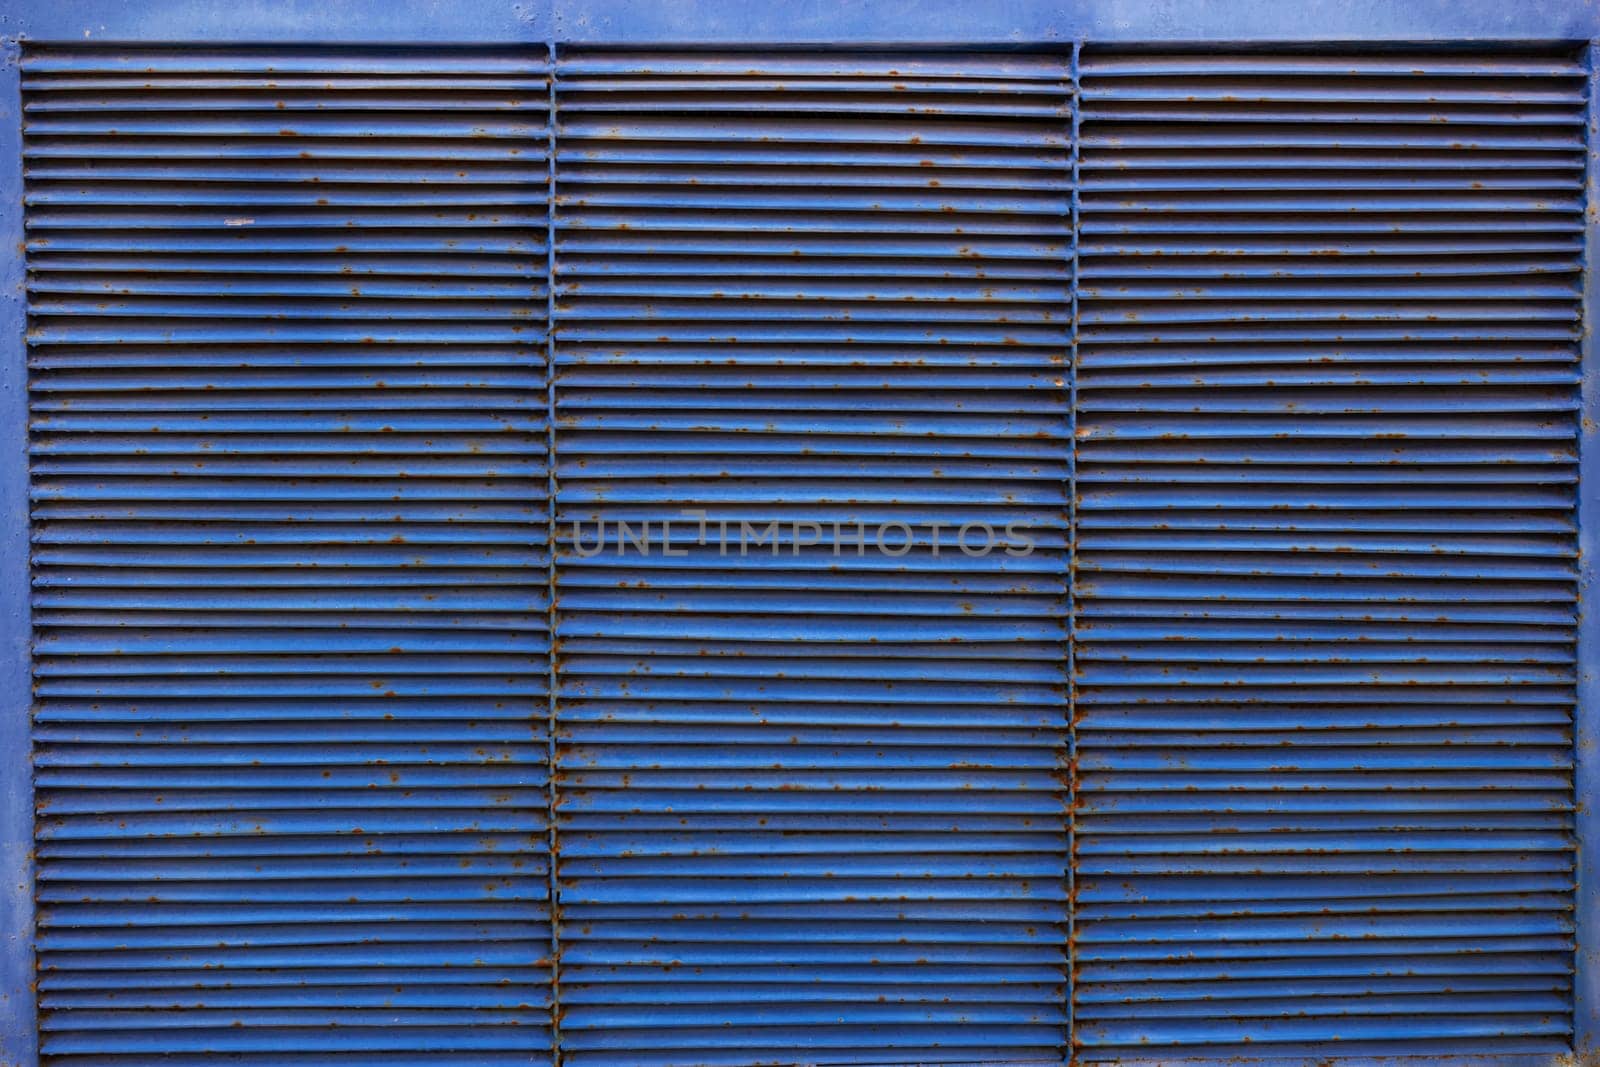 Photograph abstract background blue metal grille blinds. horizontal stripes.